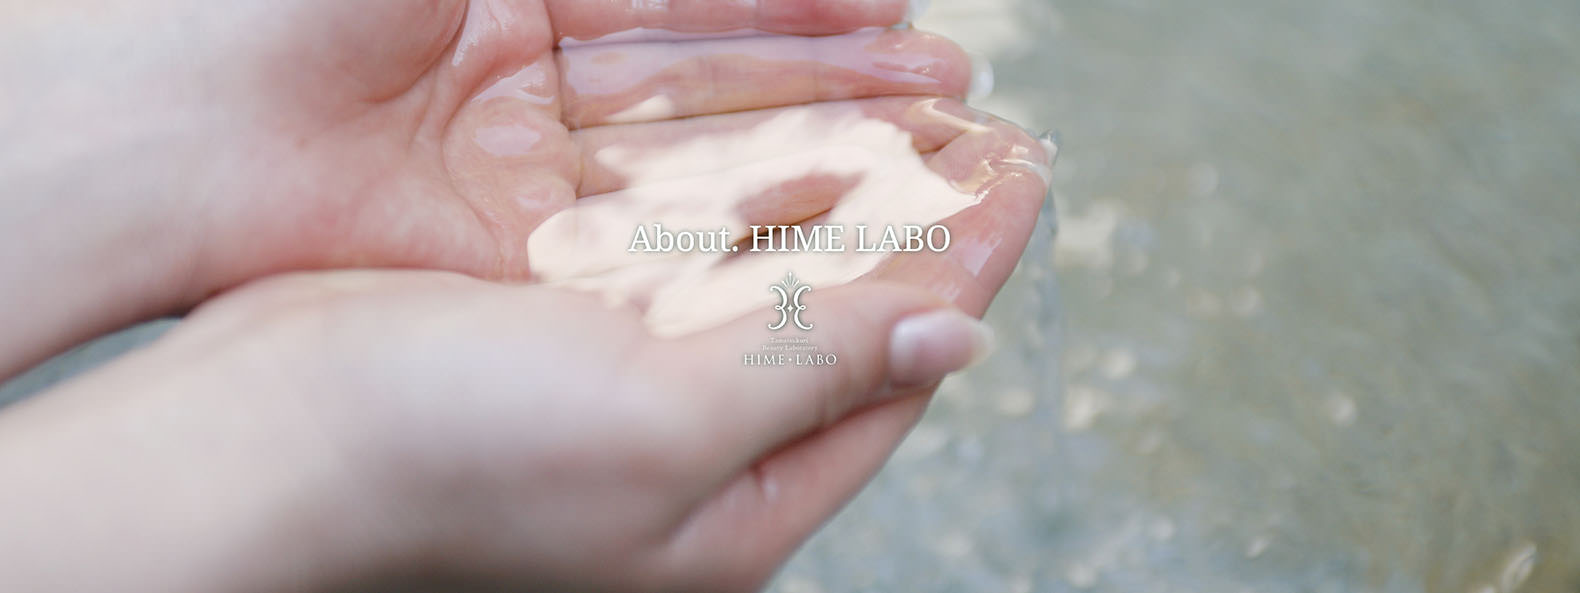 About.HIME LABO